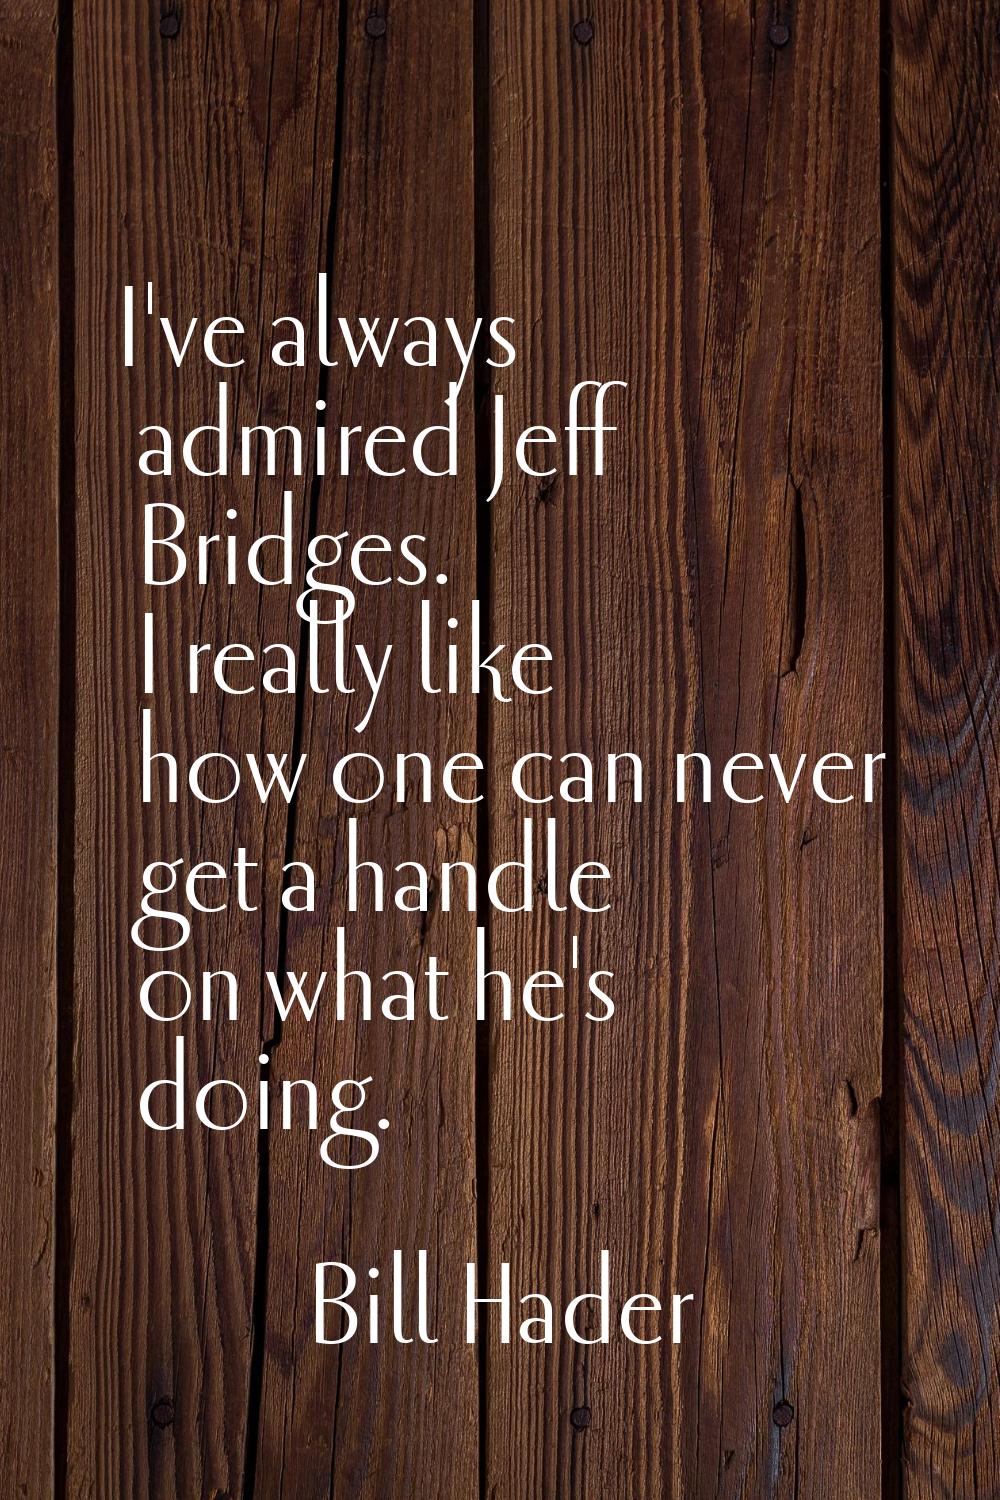 I've always admired Jeff Bridges. I really like how one can never get a handle on what he's doing.